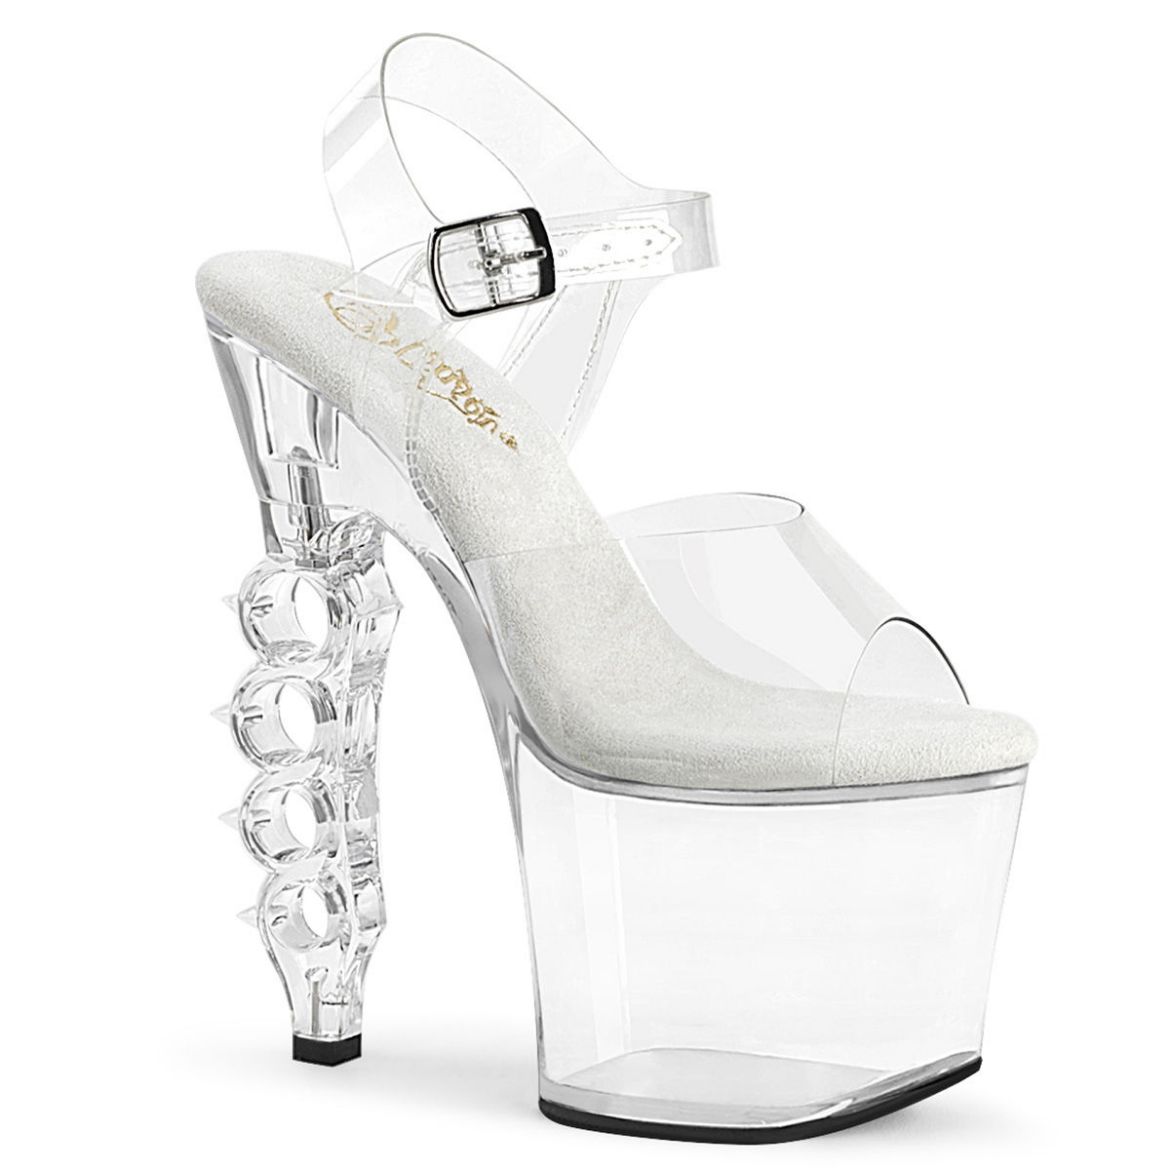 Product image of Pleaser IRONGRIP-708 Clear/Clear 7 inch (17.8 cm) Brass Knuckle Heel 3 1/4 inch (8.3 cm) Platform Ankle Strap Sandal Shoes